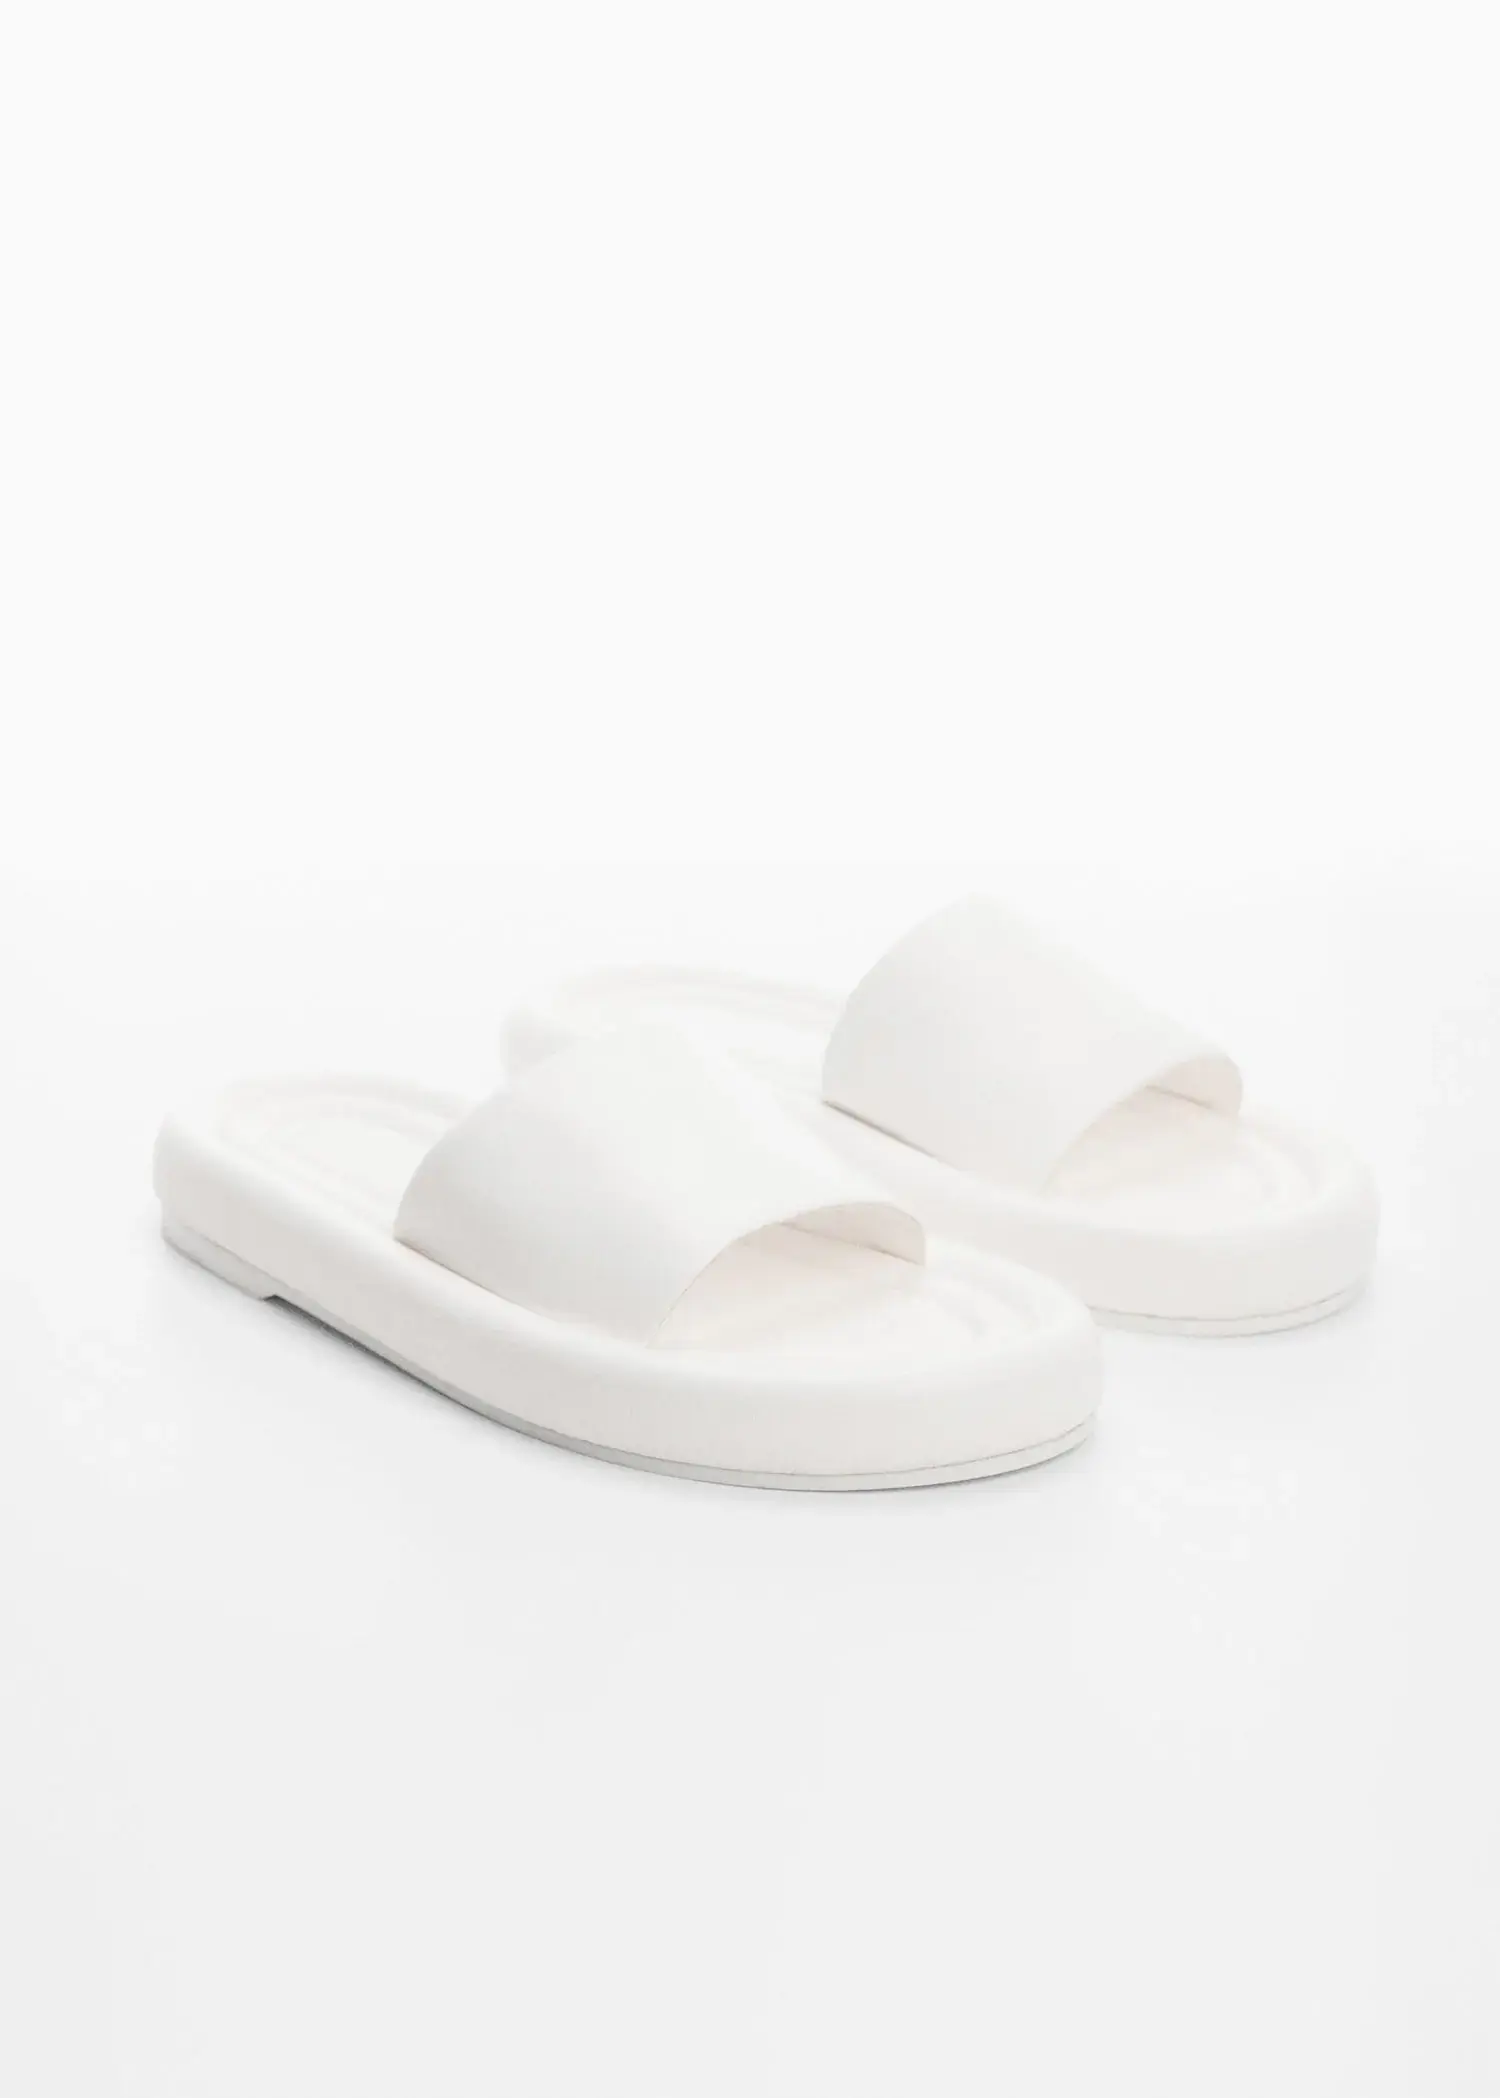 Mango Leather thong sandals. a pair of white sandals sitting on top of a white surface. 